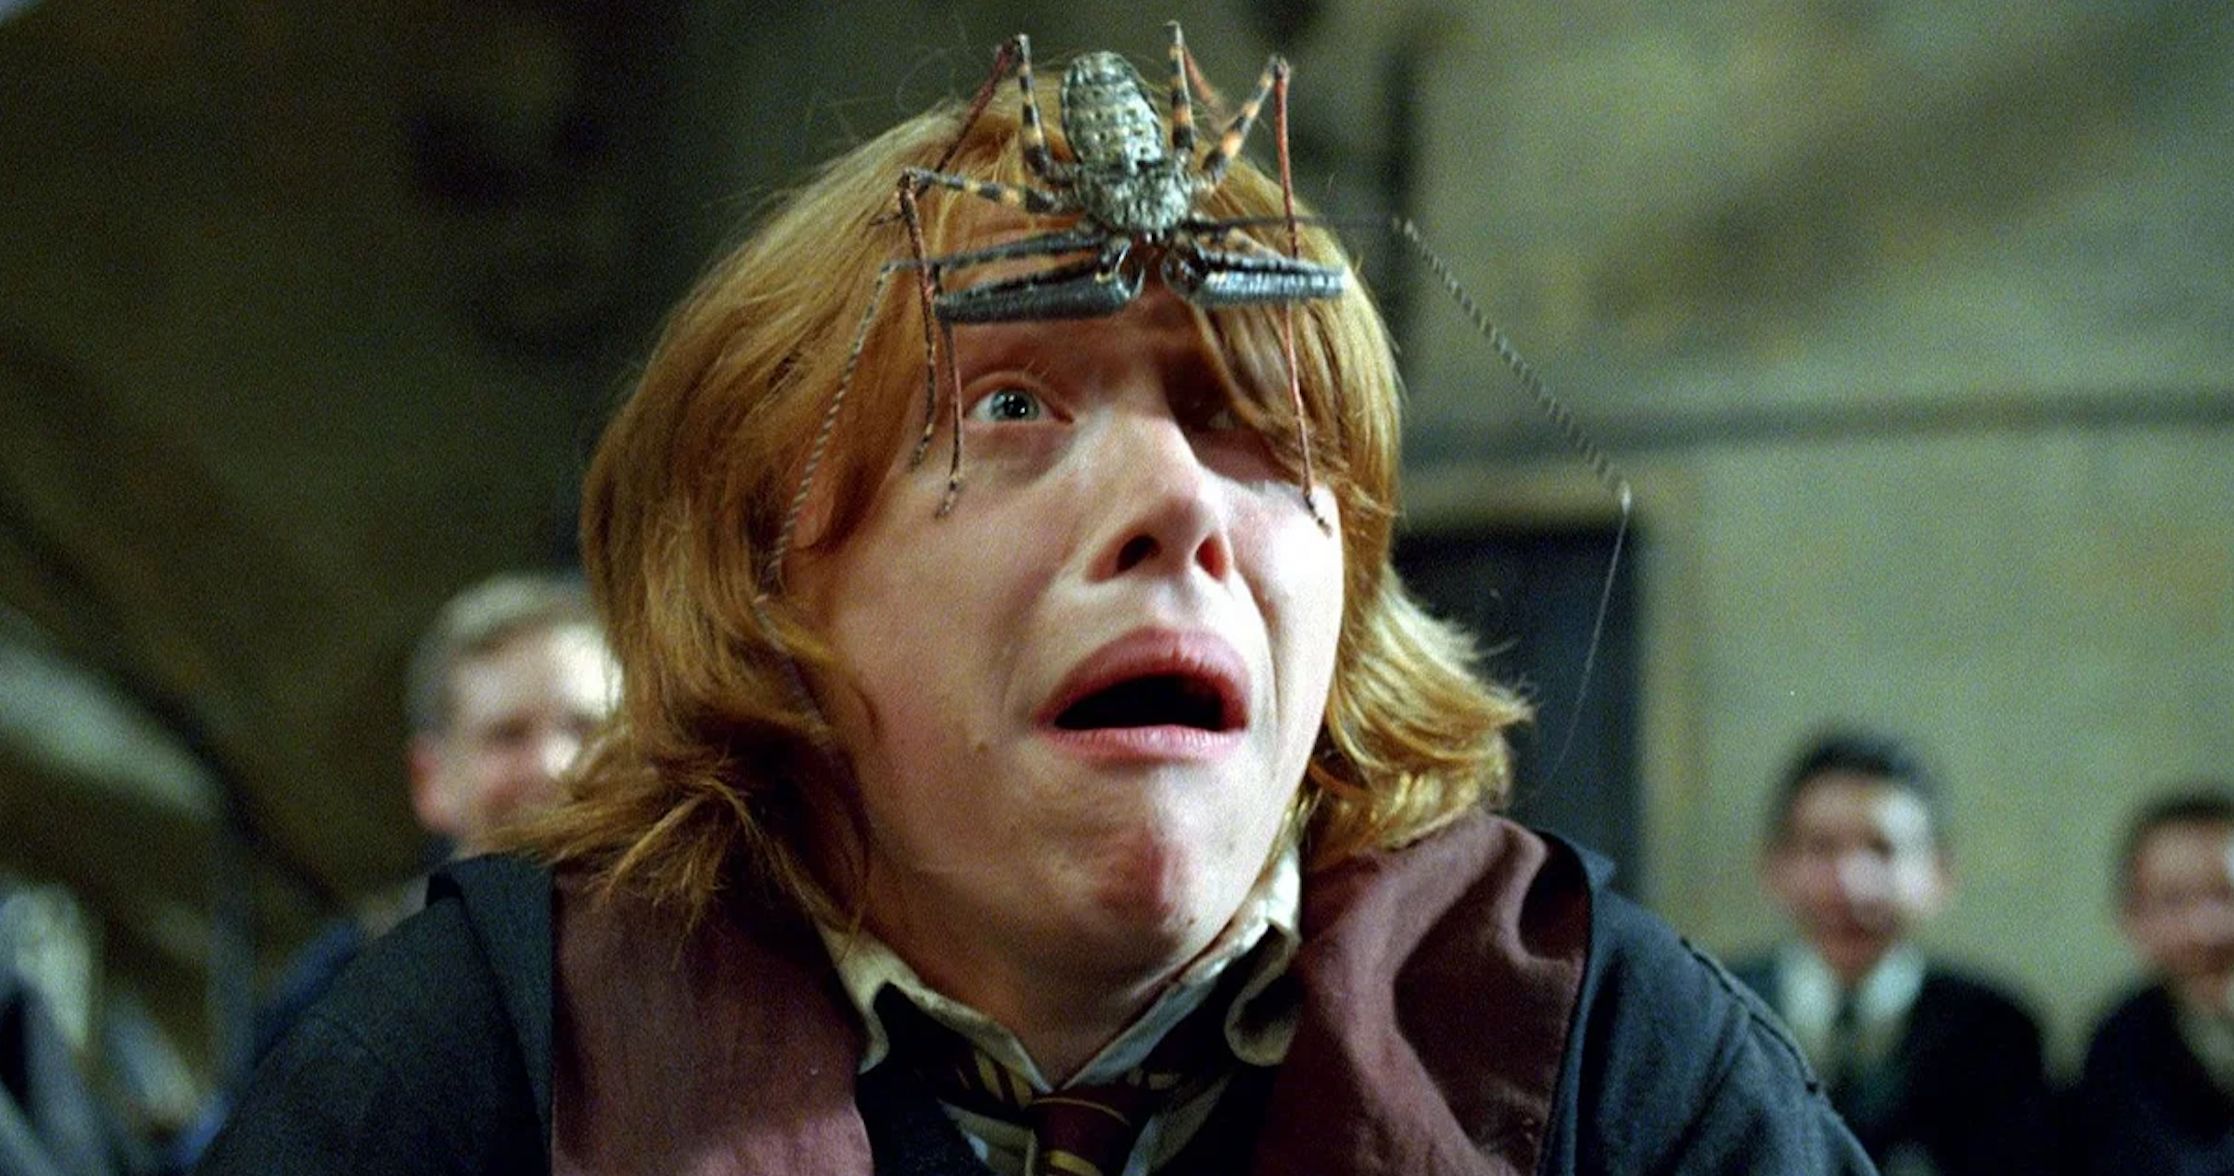 Filming Harry Potter Was a Suffocating Experience Says Star Rupert Grint